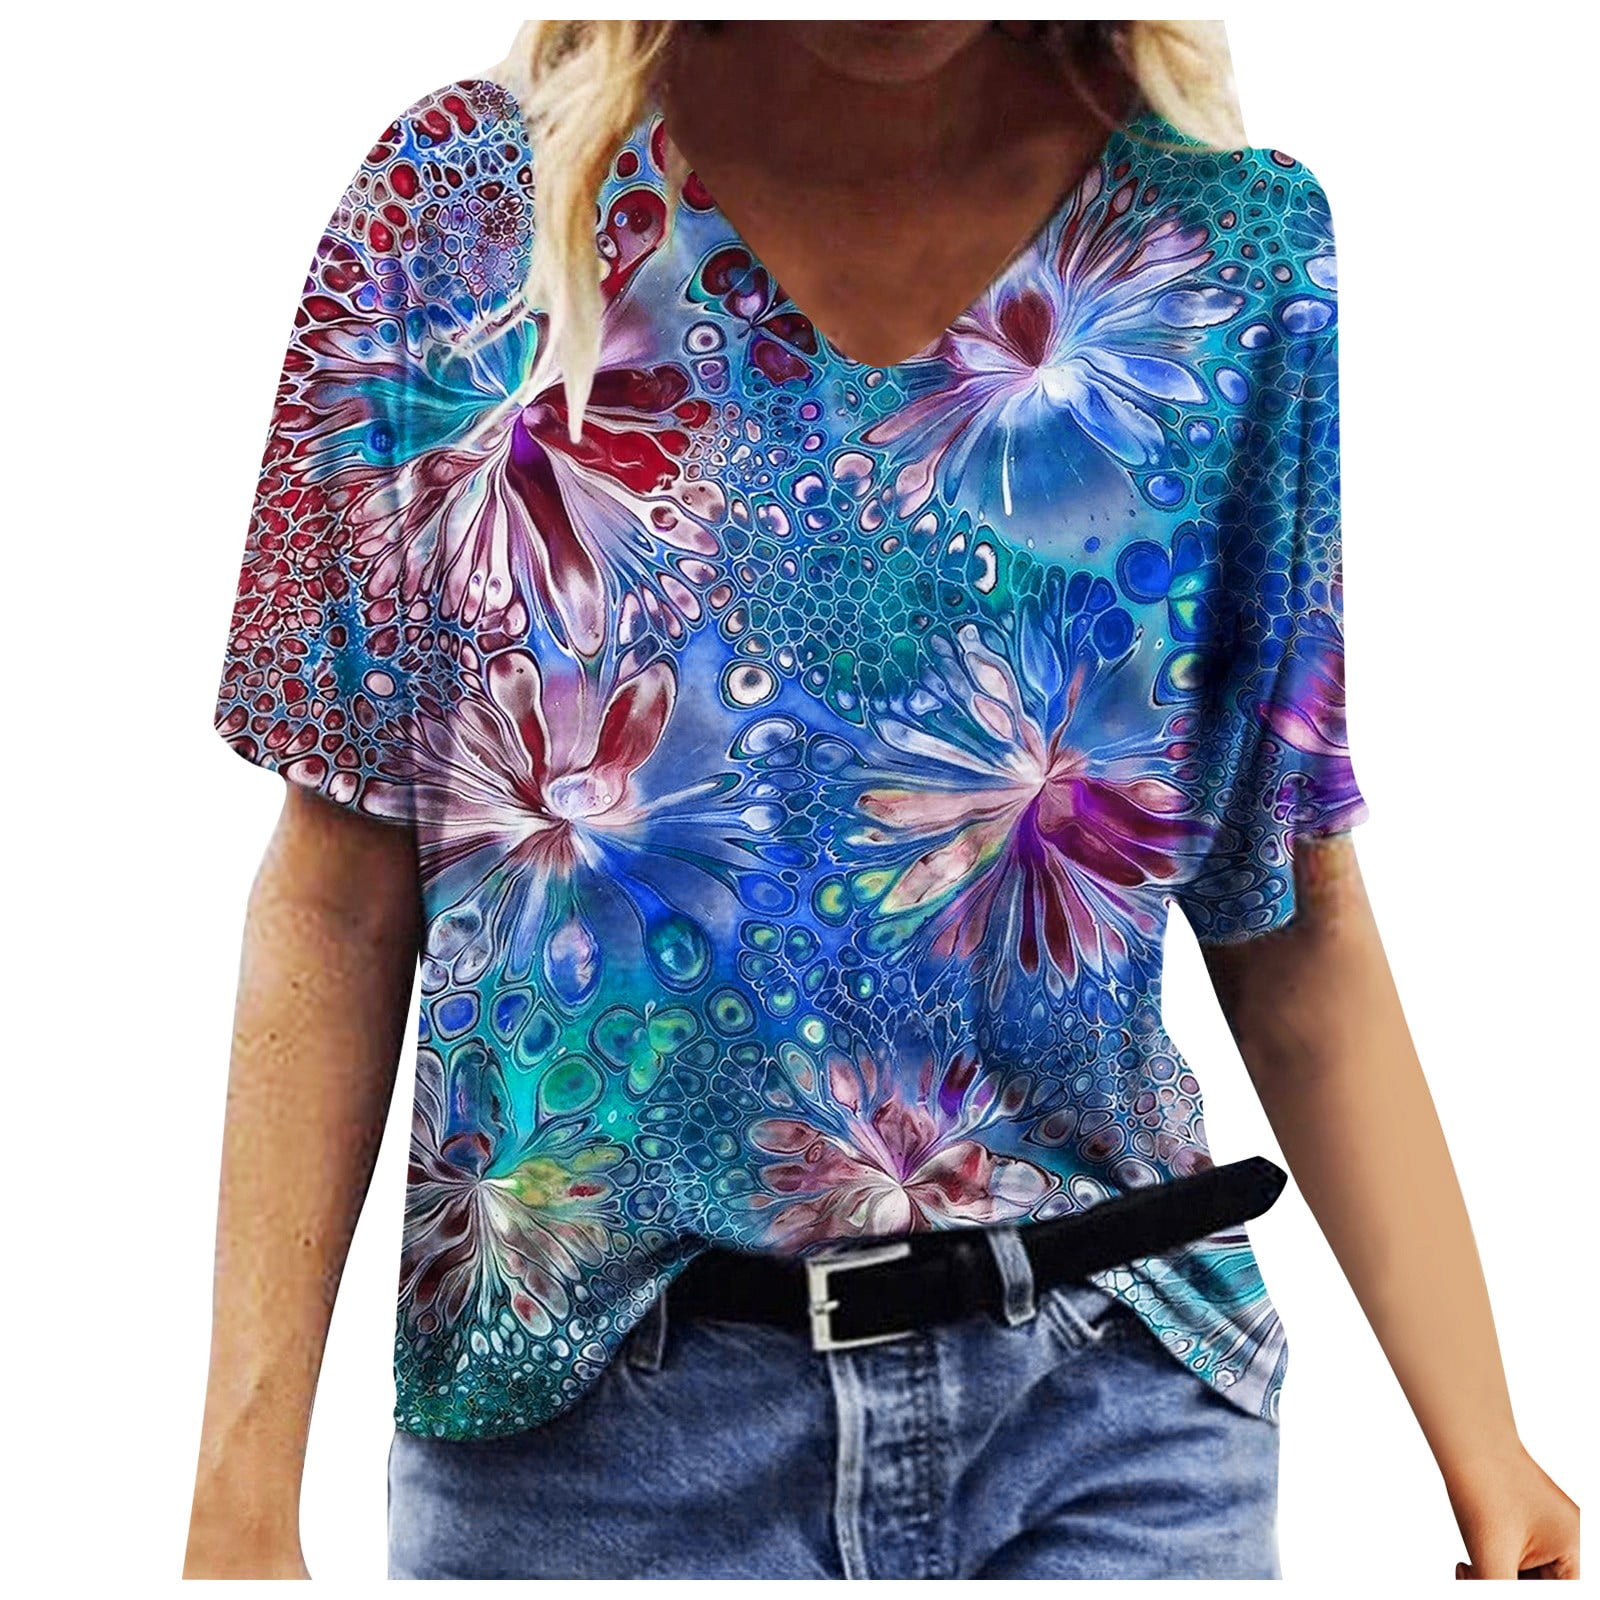 Womens Short Sleeve Shirts Cute Printed V-Neck Tshirts Blouse Summer Casual Tops Loose Fit Graphic Tees 